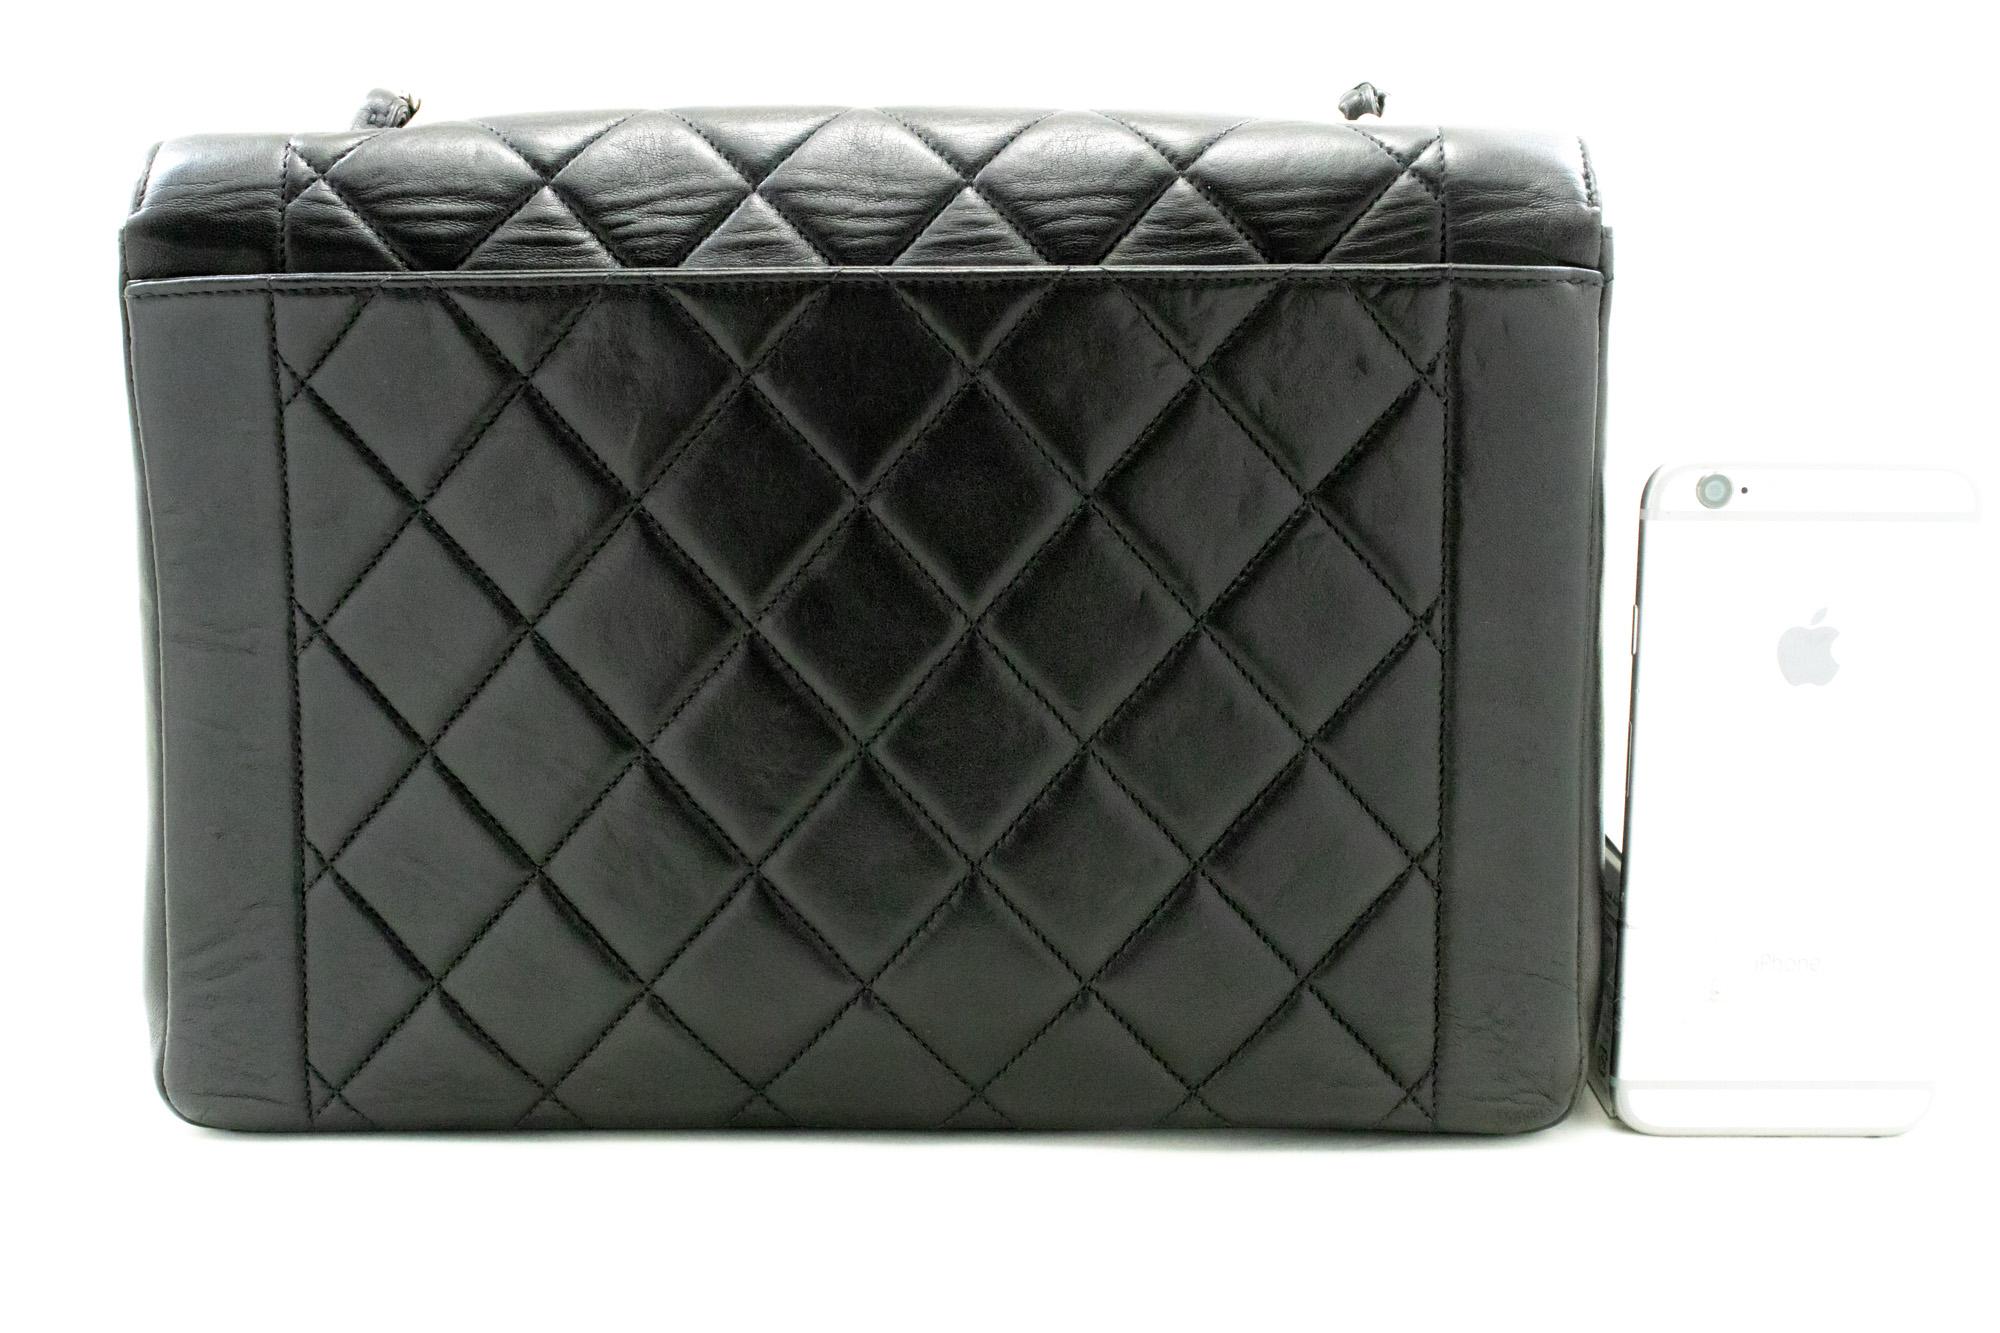 CHANEL Diana Flap Large Silver Chain Shoulder Bag Black Quilted In Good Condition For Sale In Takamatsu-shi, JP